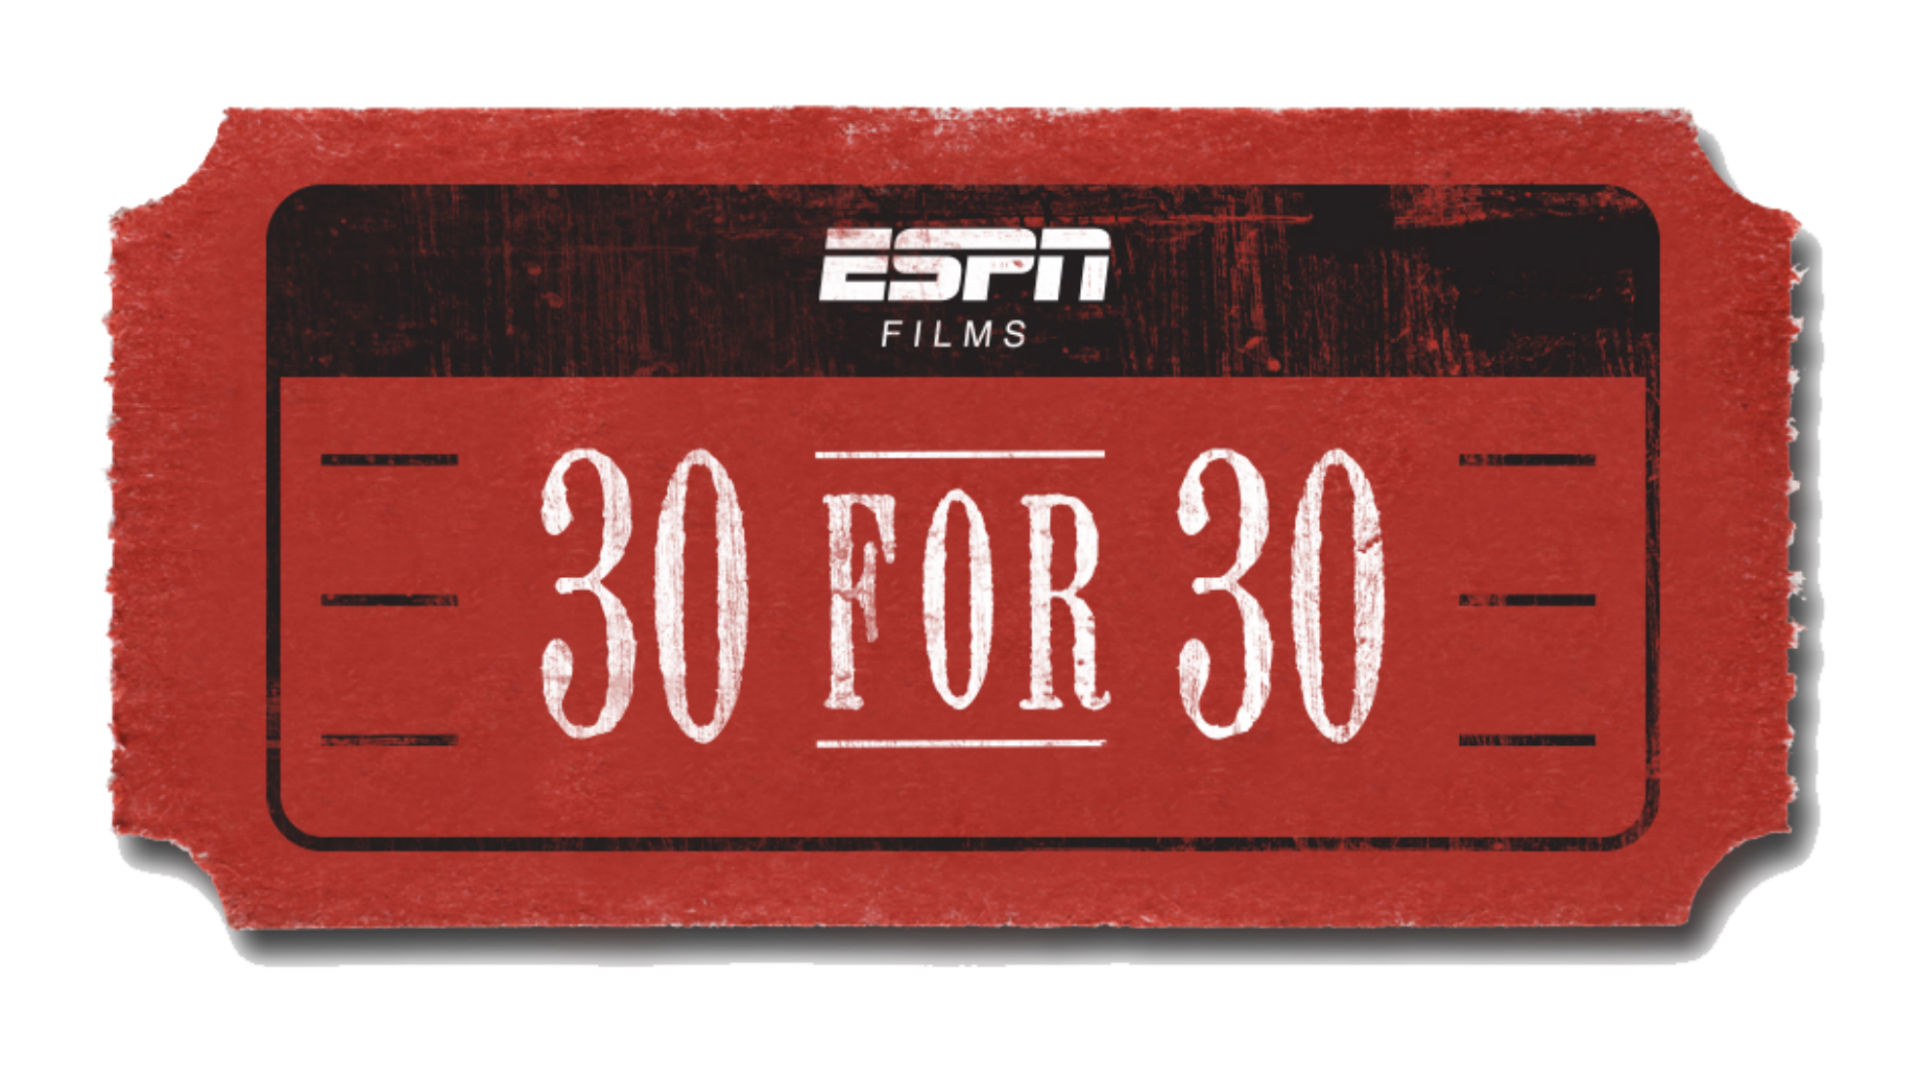 What You Need to Know About “30 for 30”